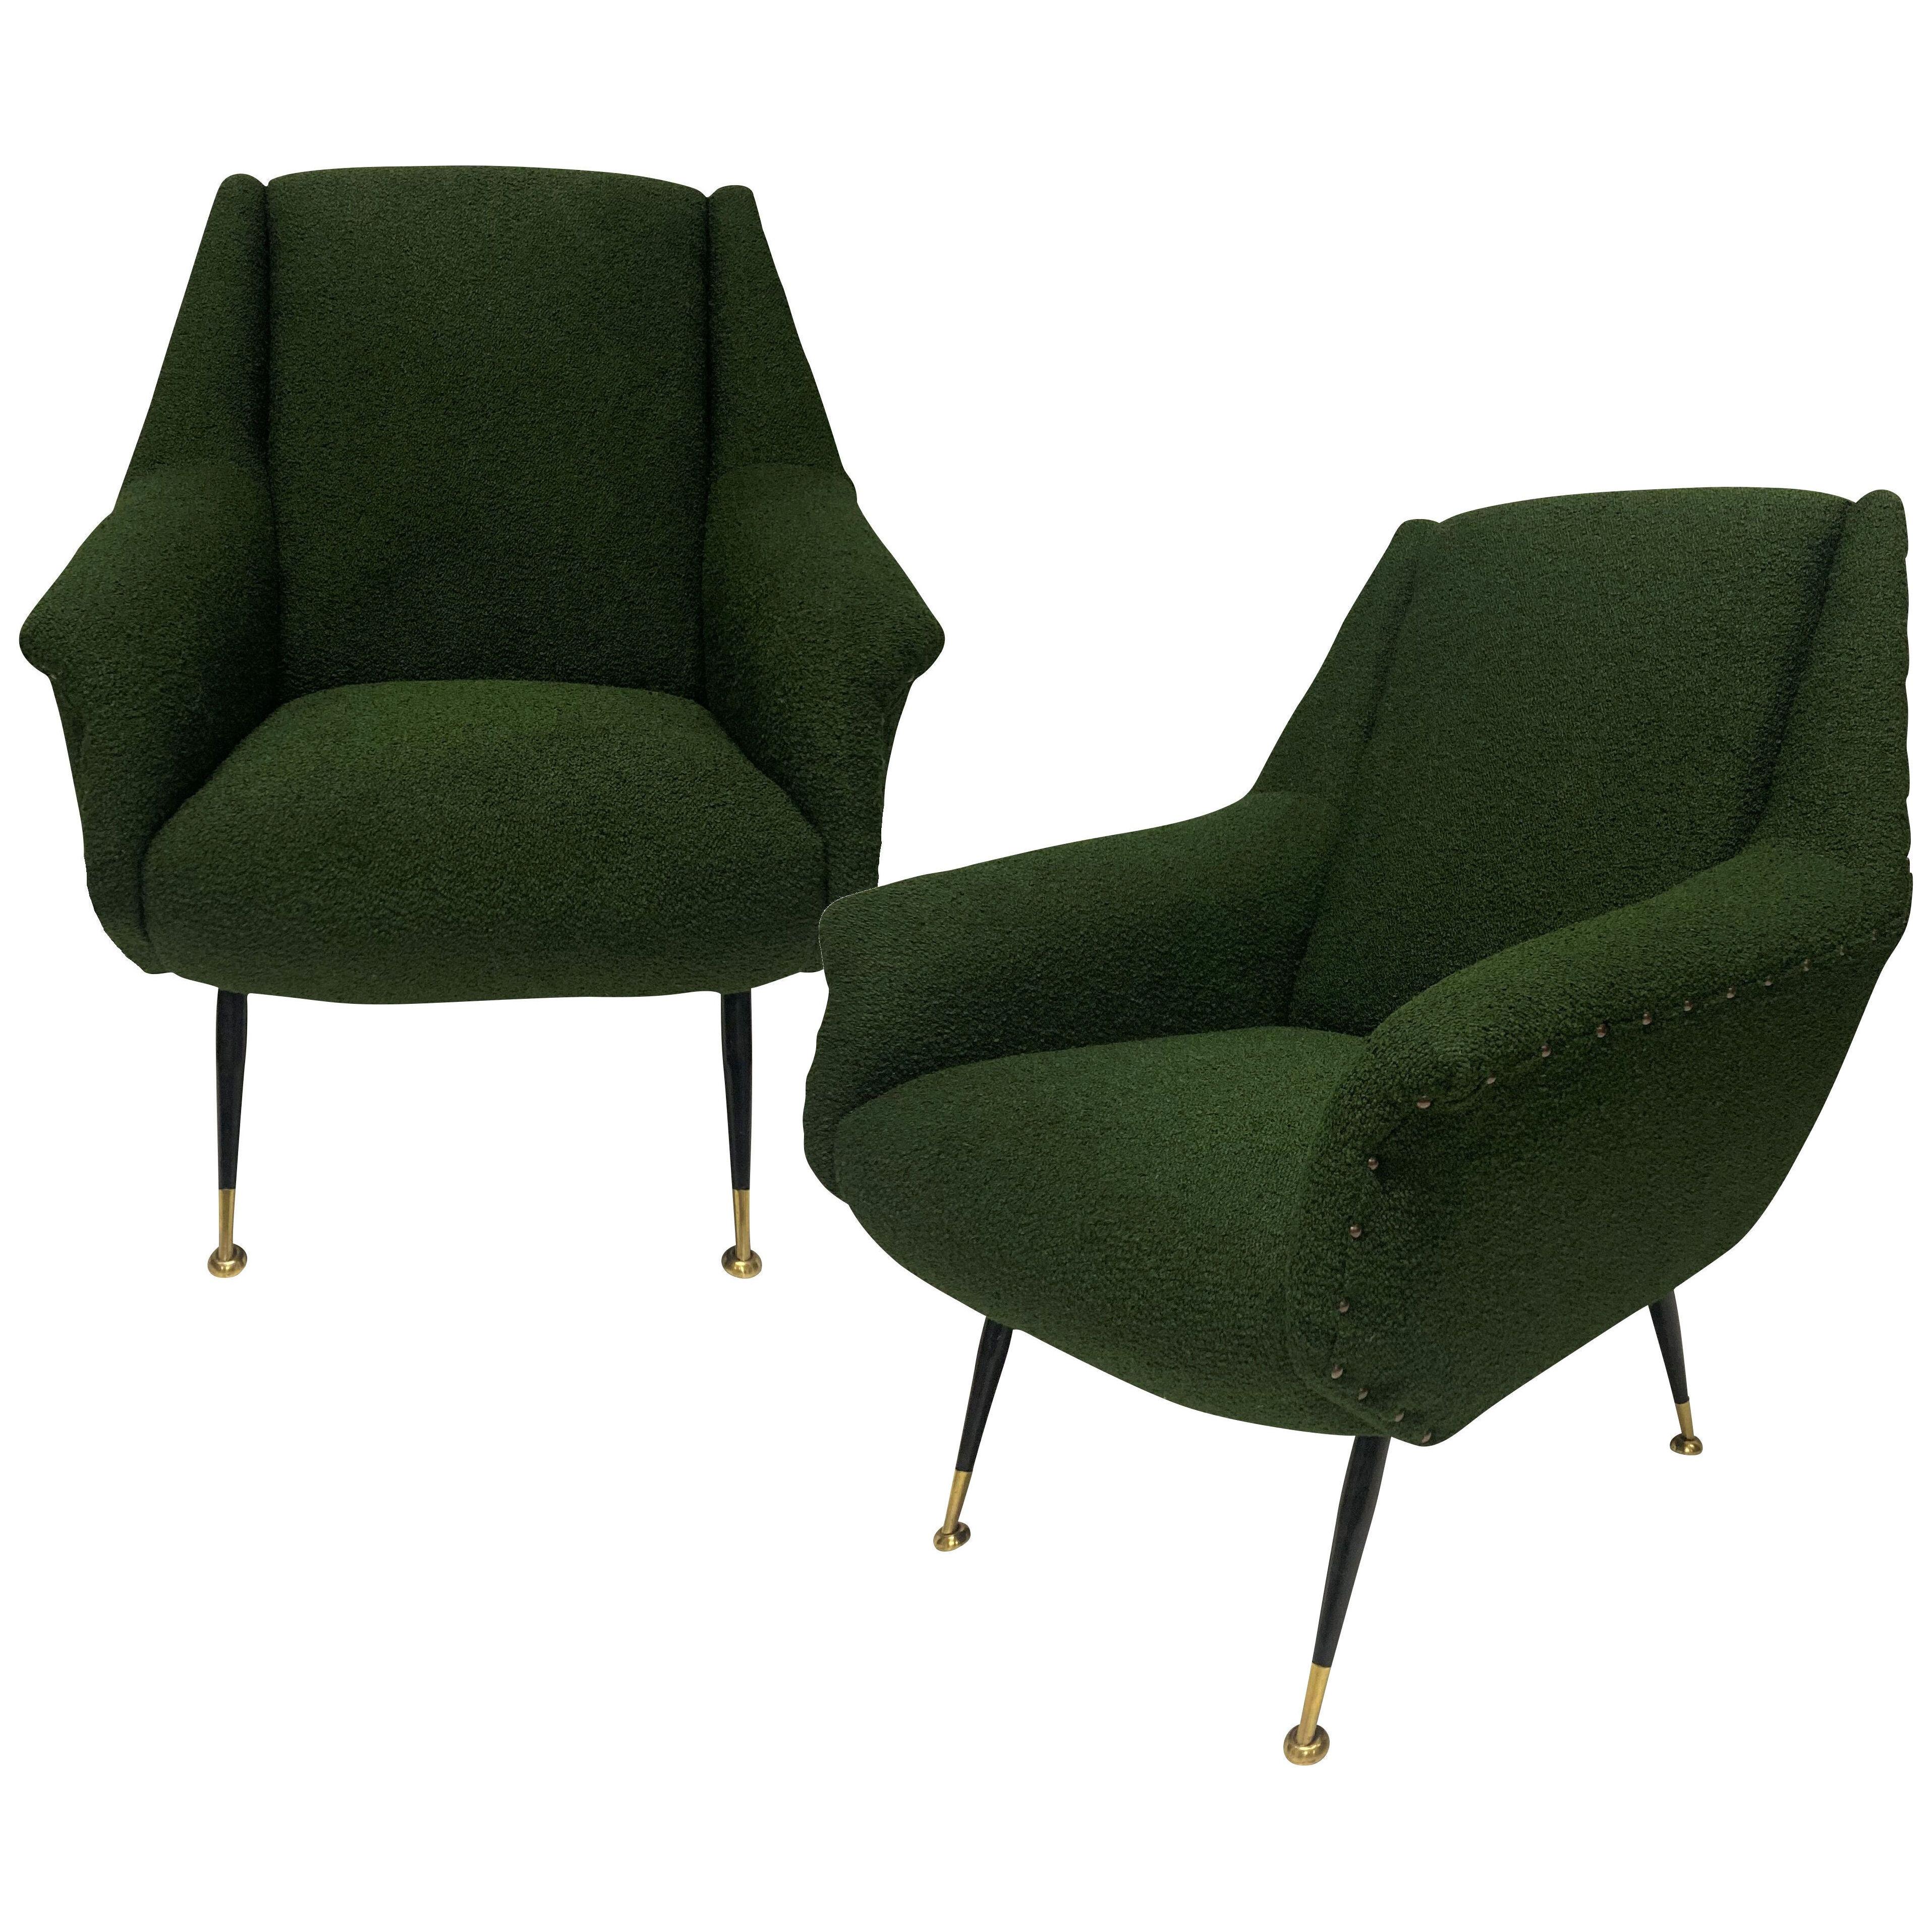 A PAIR OF LOUNGE CHAIRS BY GIO PONTI